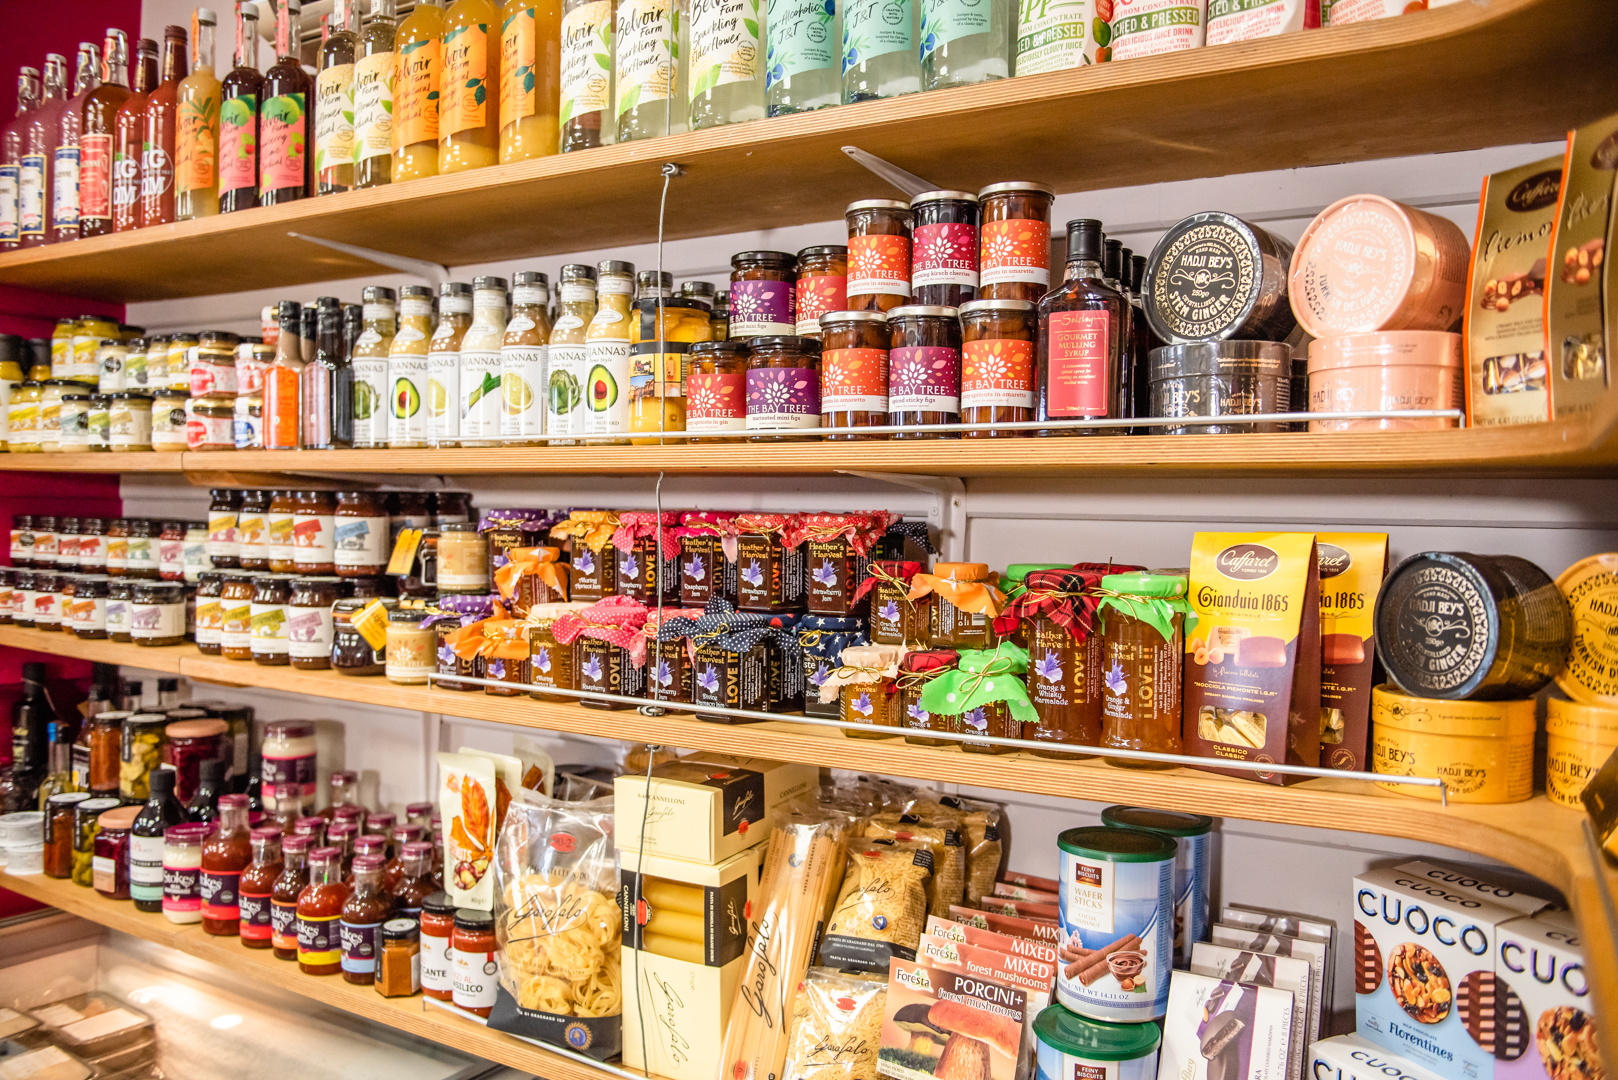 Deli shop shelves with jars of pickles, jams and speciality foods